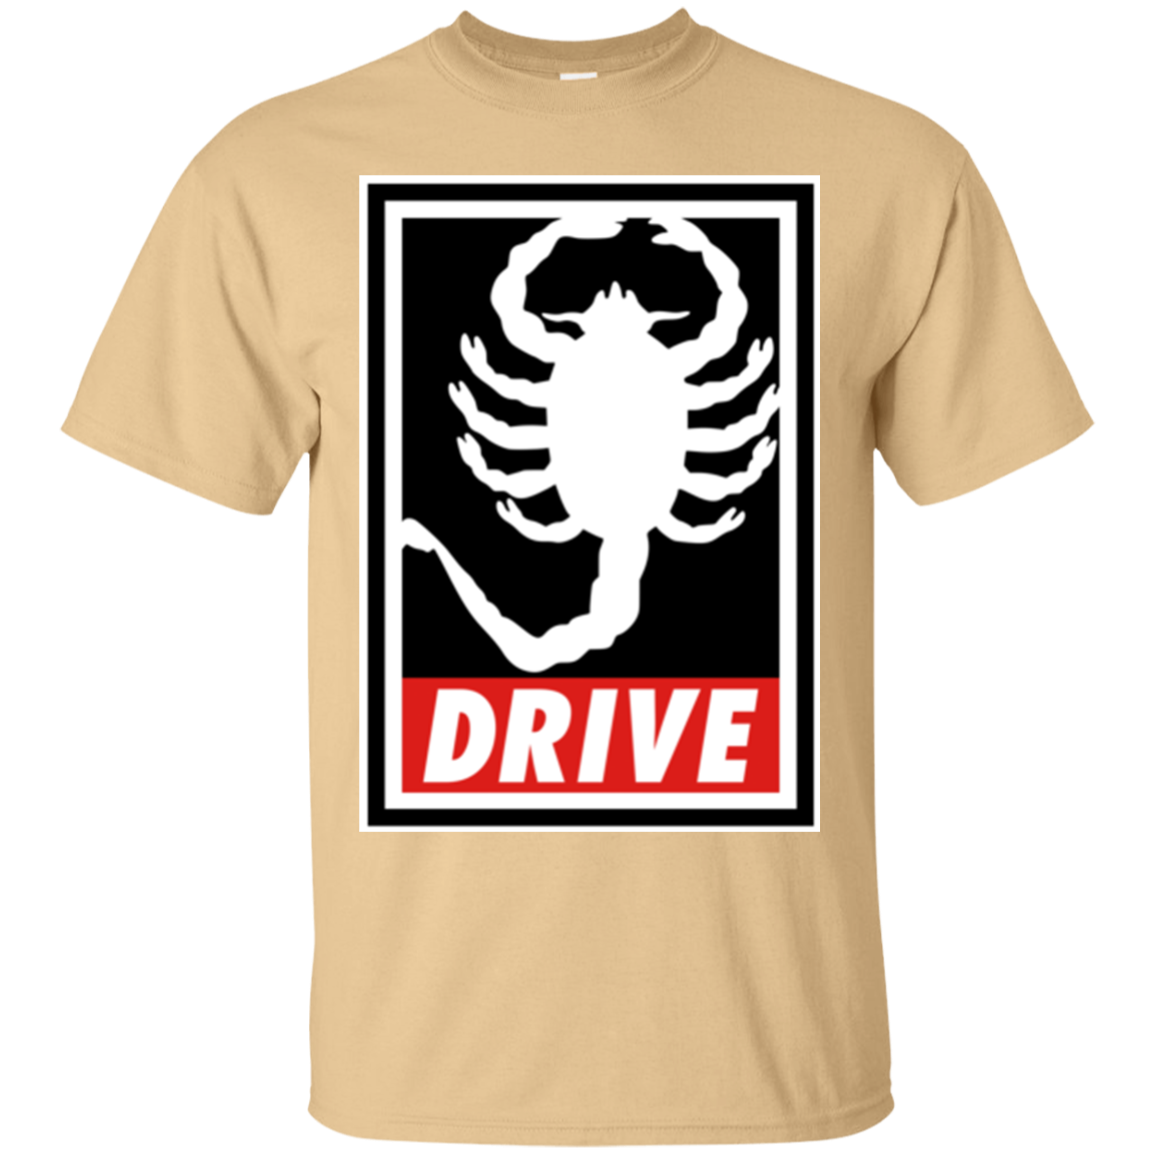 Obey and Drive T-Shirt